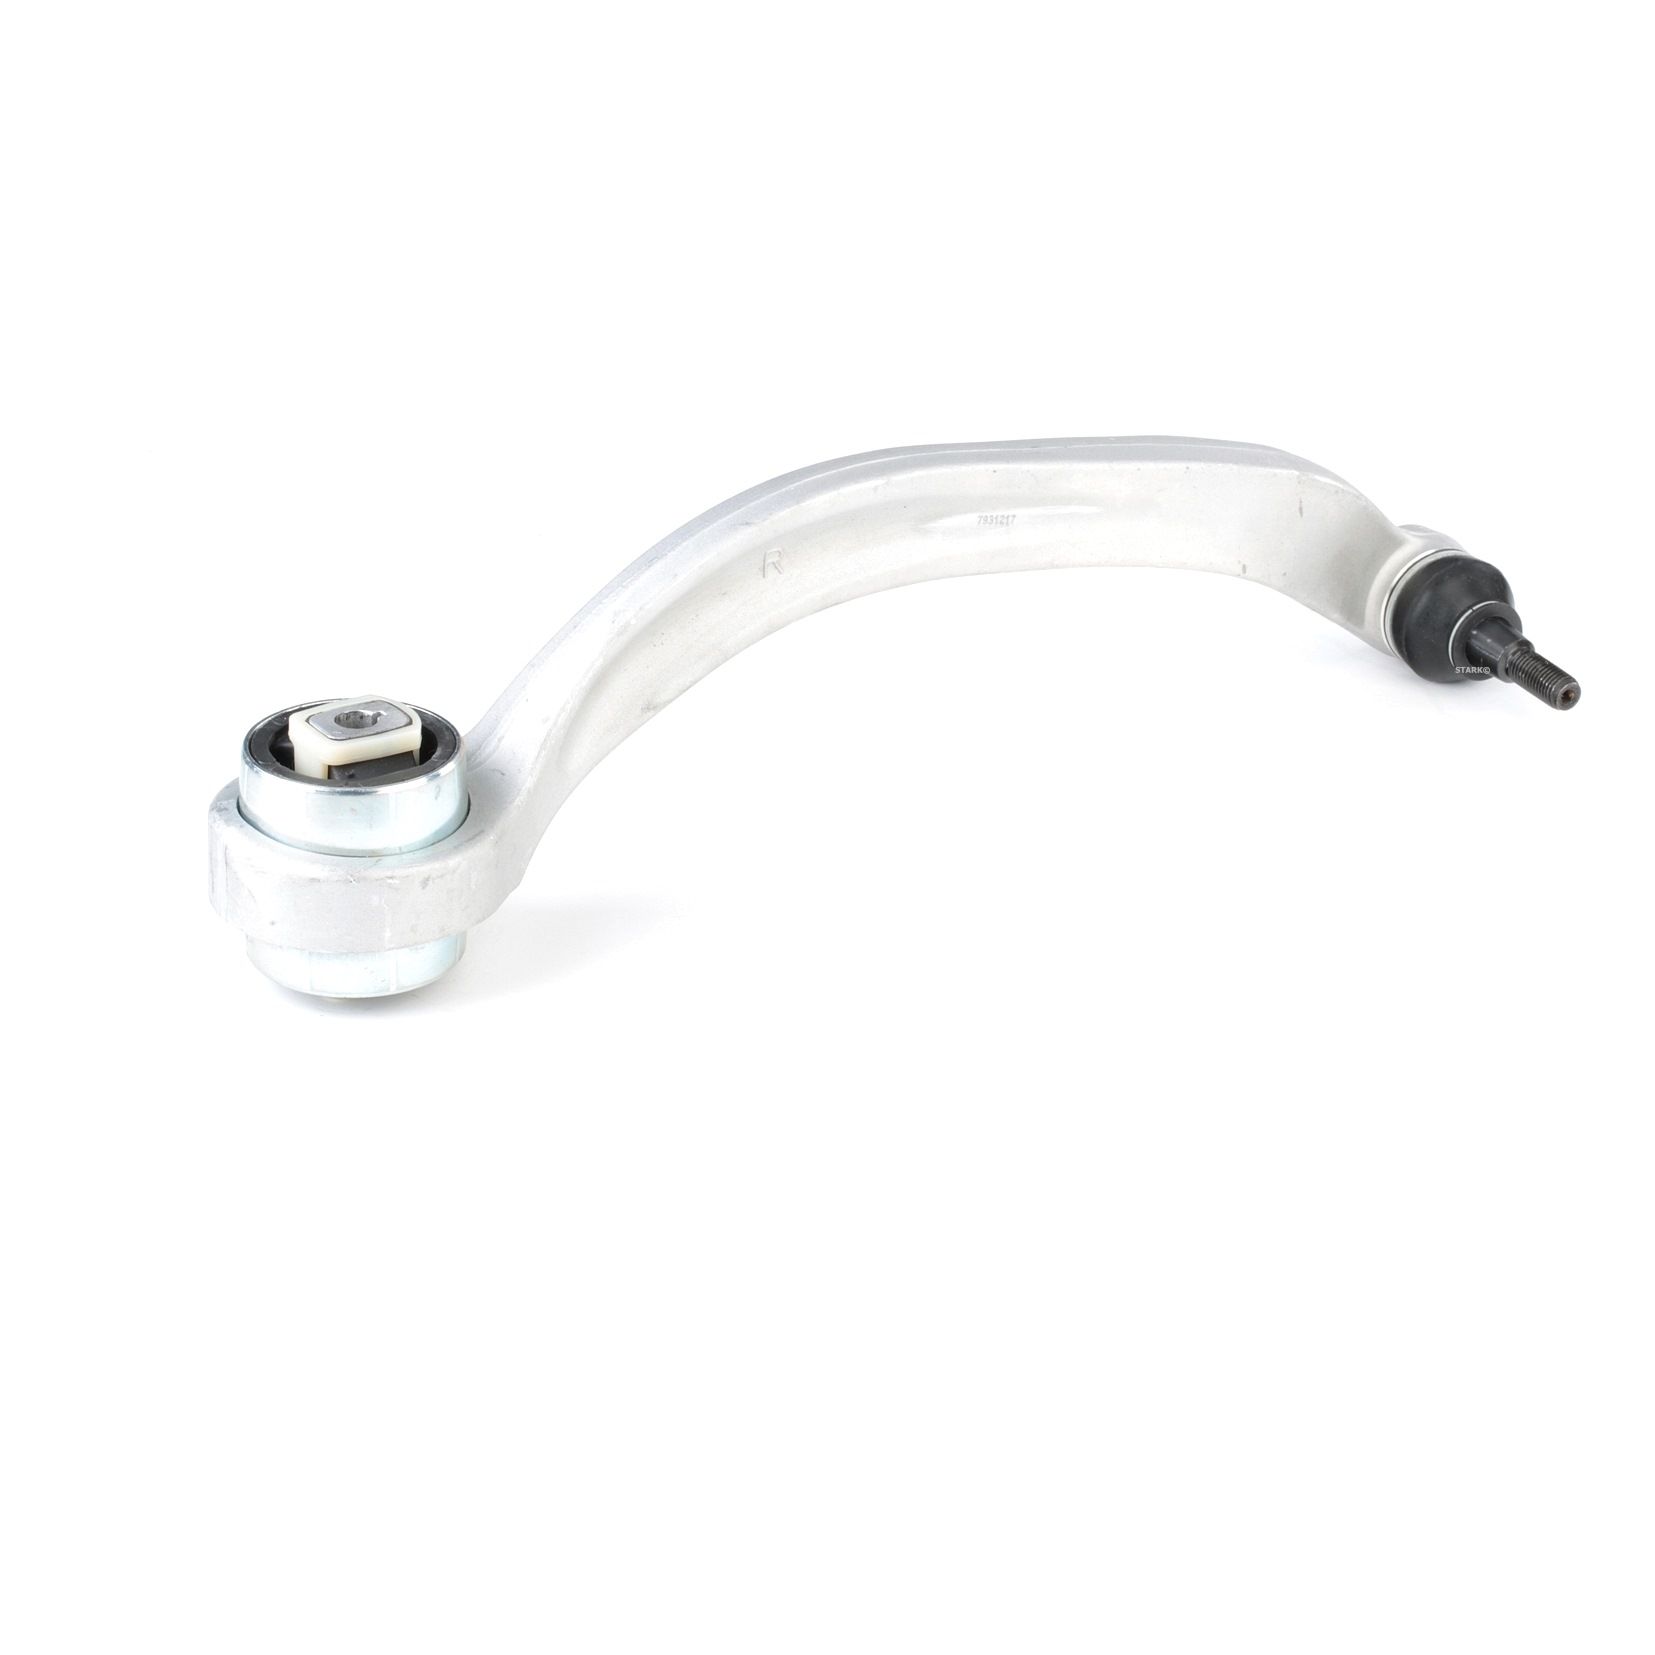 SKCA-0050382 STARK Control arm MINI with accessories, with rubber mount, Rear, Front Axle Right, Control Arm, Aluminium, Cone Size: 15,5 mm